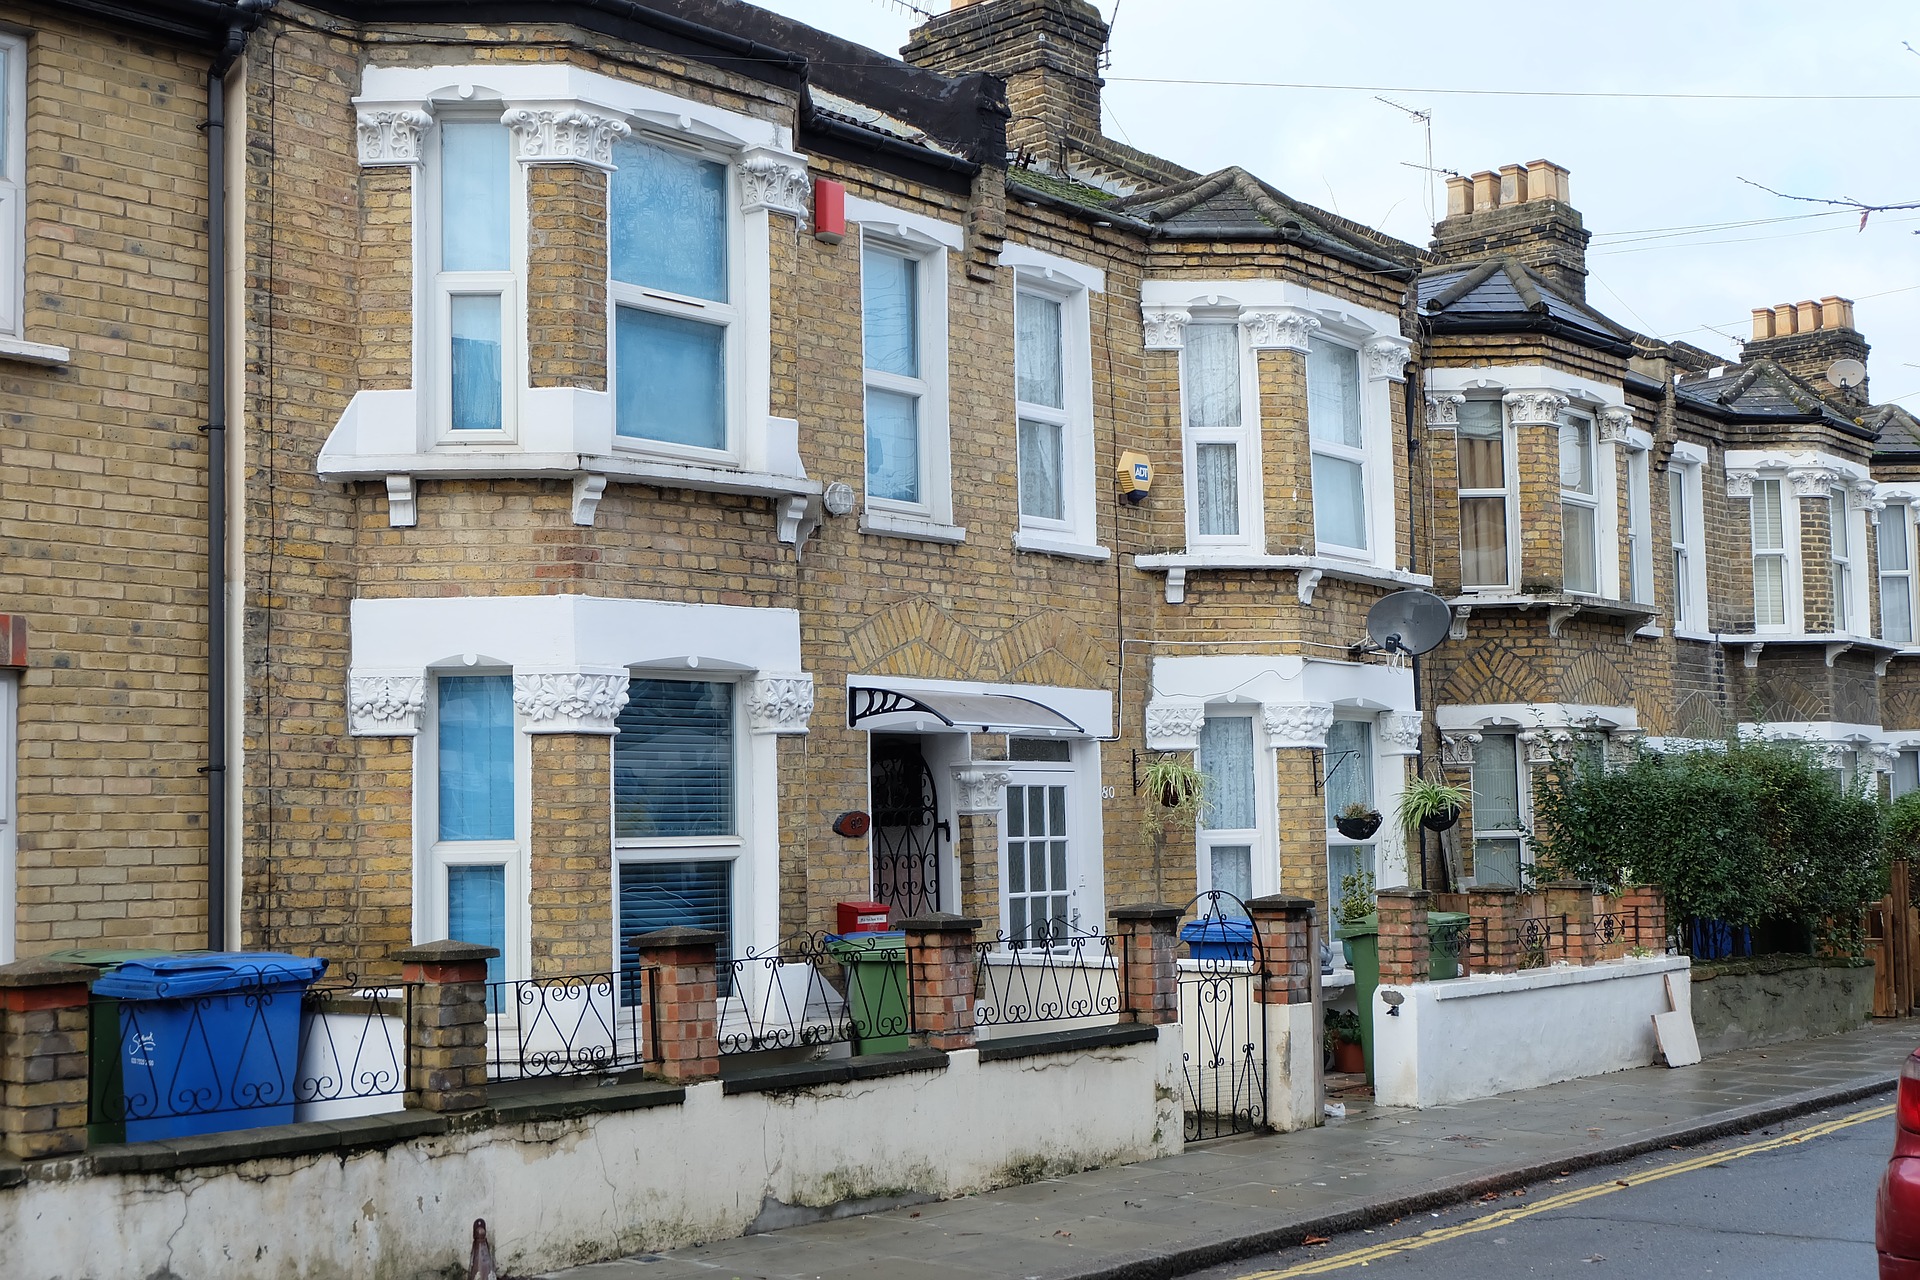 How many empty homes are there in the UK? The Big Issue investigates. Image credit: Estate Agent Networking / Pixabay